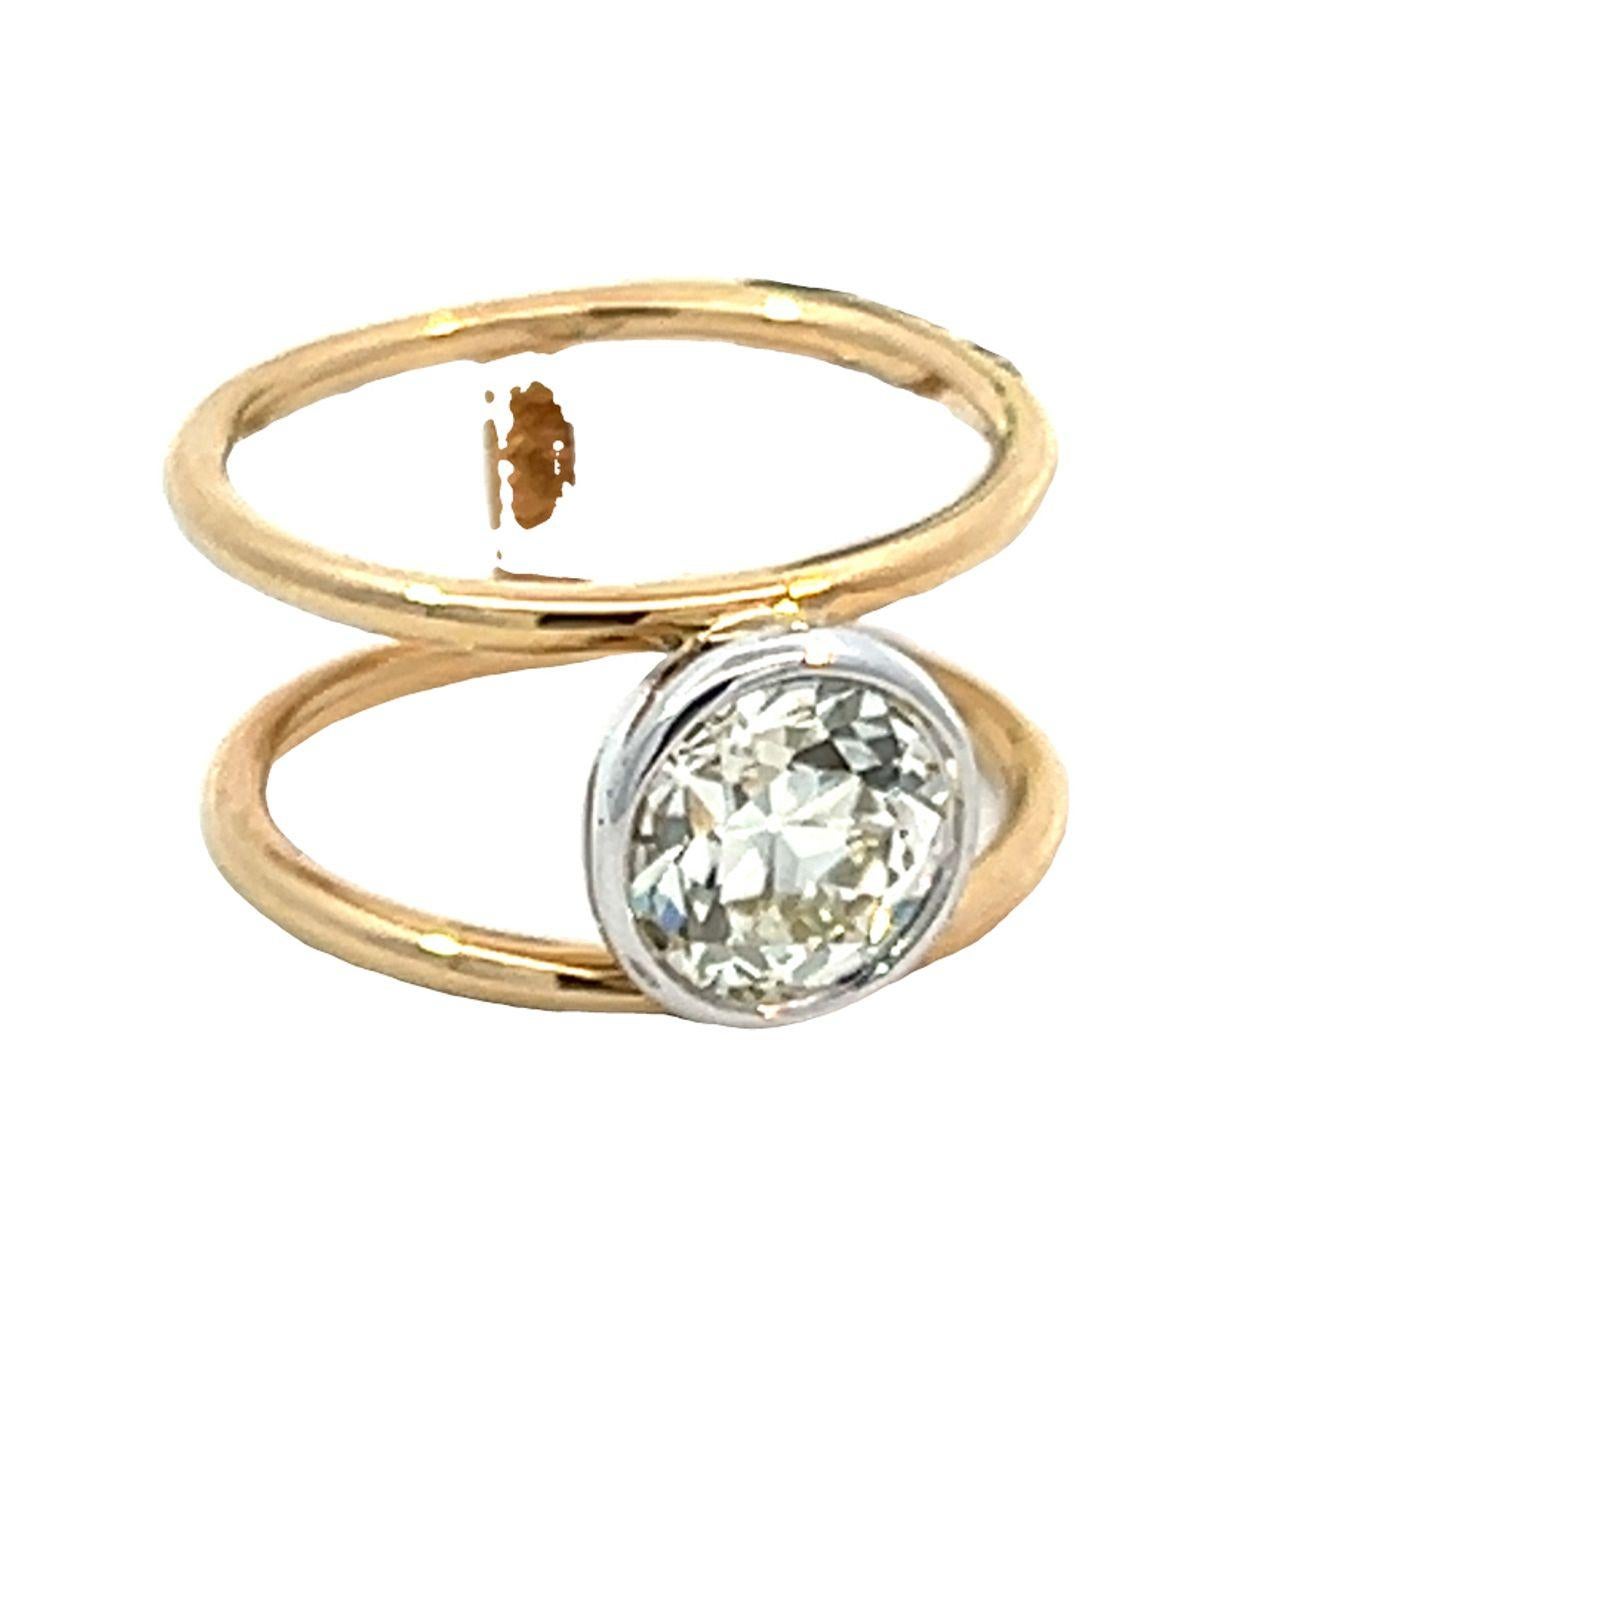 GIA-certified old European cut diamond set with a 14K double yellow gold band. The diamond weighs 1.87 carats is N color and VS2 clarity. 
The ring is crafted in 14-karat yellow and white gold. The old European cut diamond is bezel set in 14karat